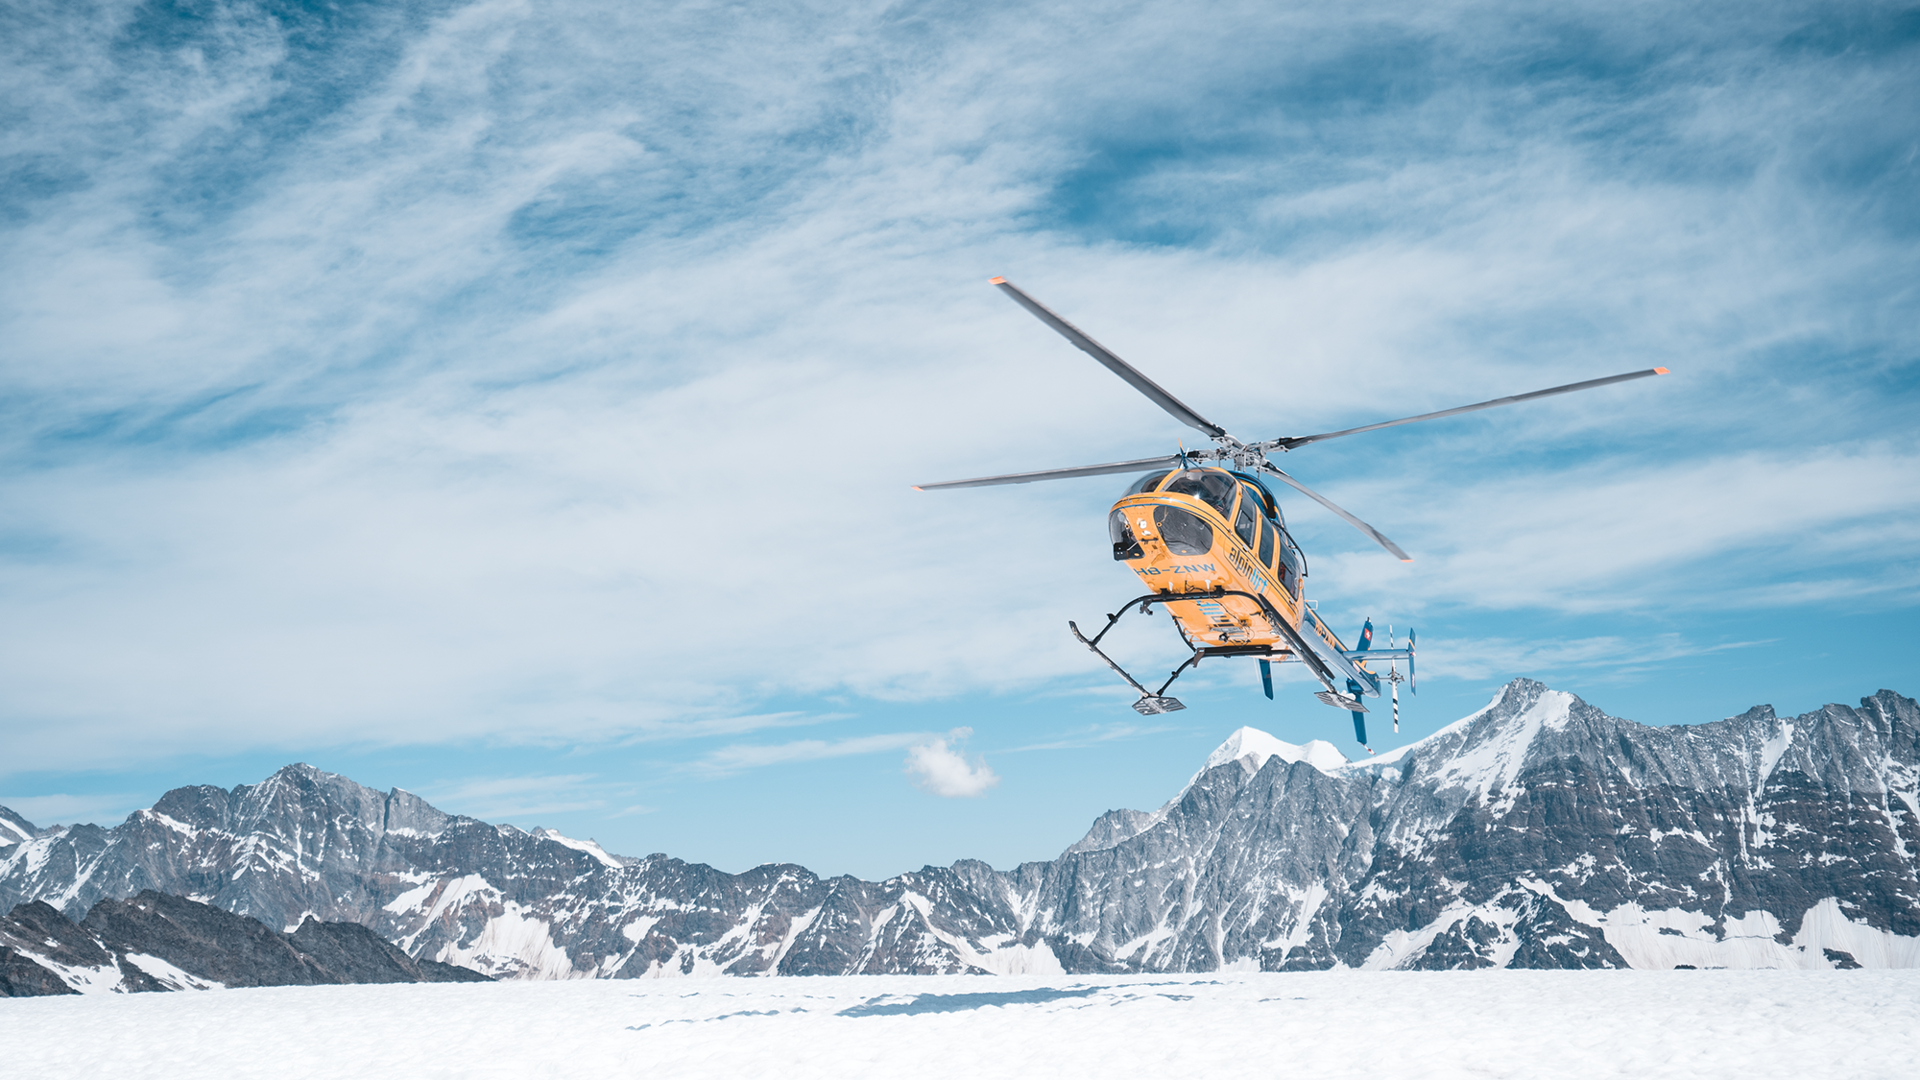 helicopter_flight_raclette with a view_snow_mountains_01